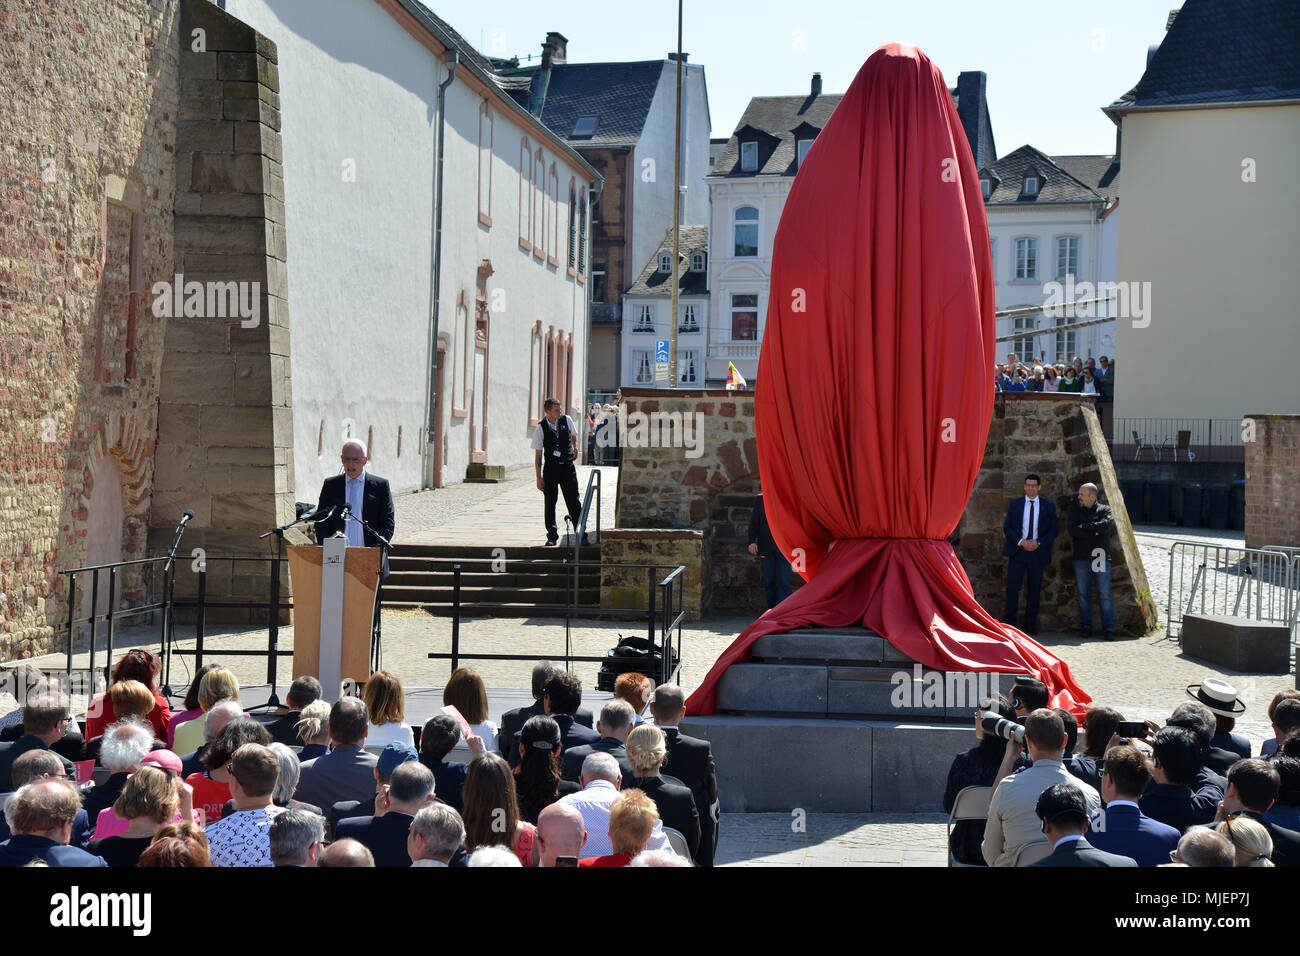 05 May 2018, Germany, Trier: The Karl Marx Statue in Trier is revealed in a ceremony. The statue weighs 2.3 tons and is 4.4 metres high. The bronze statue created by the Chinese artist Wu Weishan is a present of the People's Republic of China to the city of Trier for the 200th birthday of the city's son Karl Marx. Photo: Harald Tittel/dpa Stock Photo